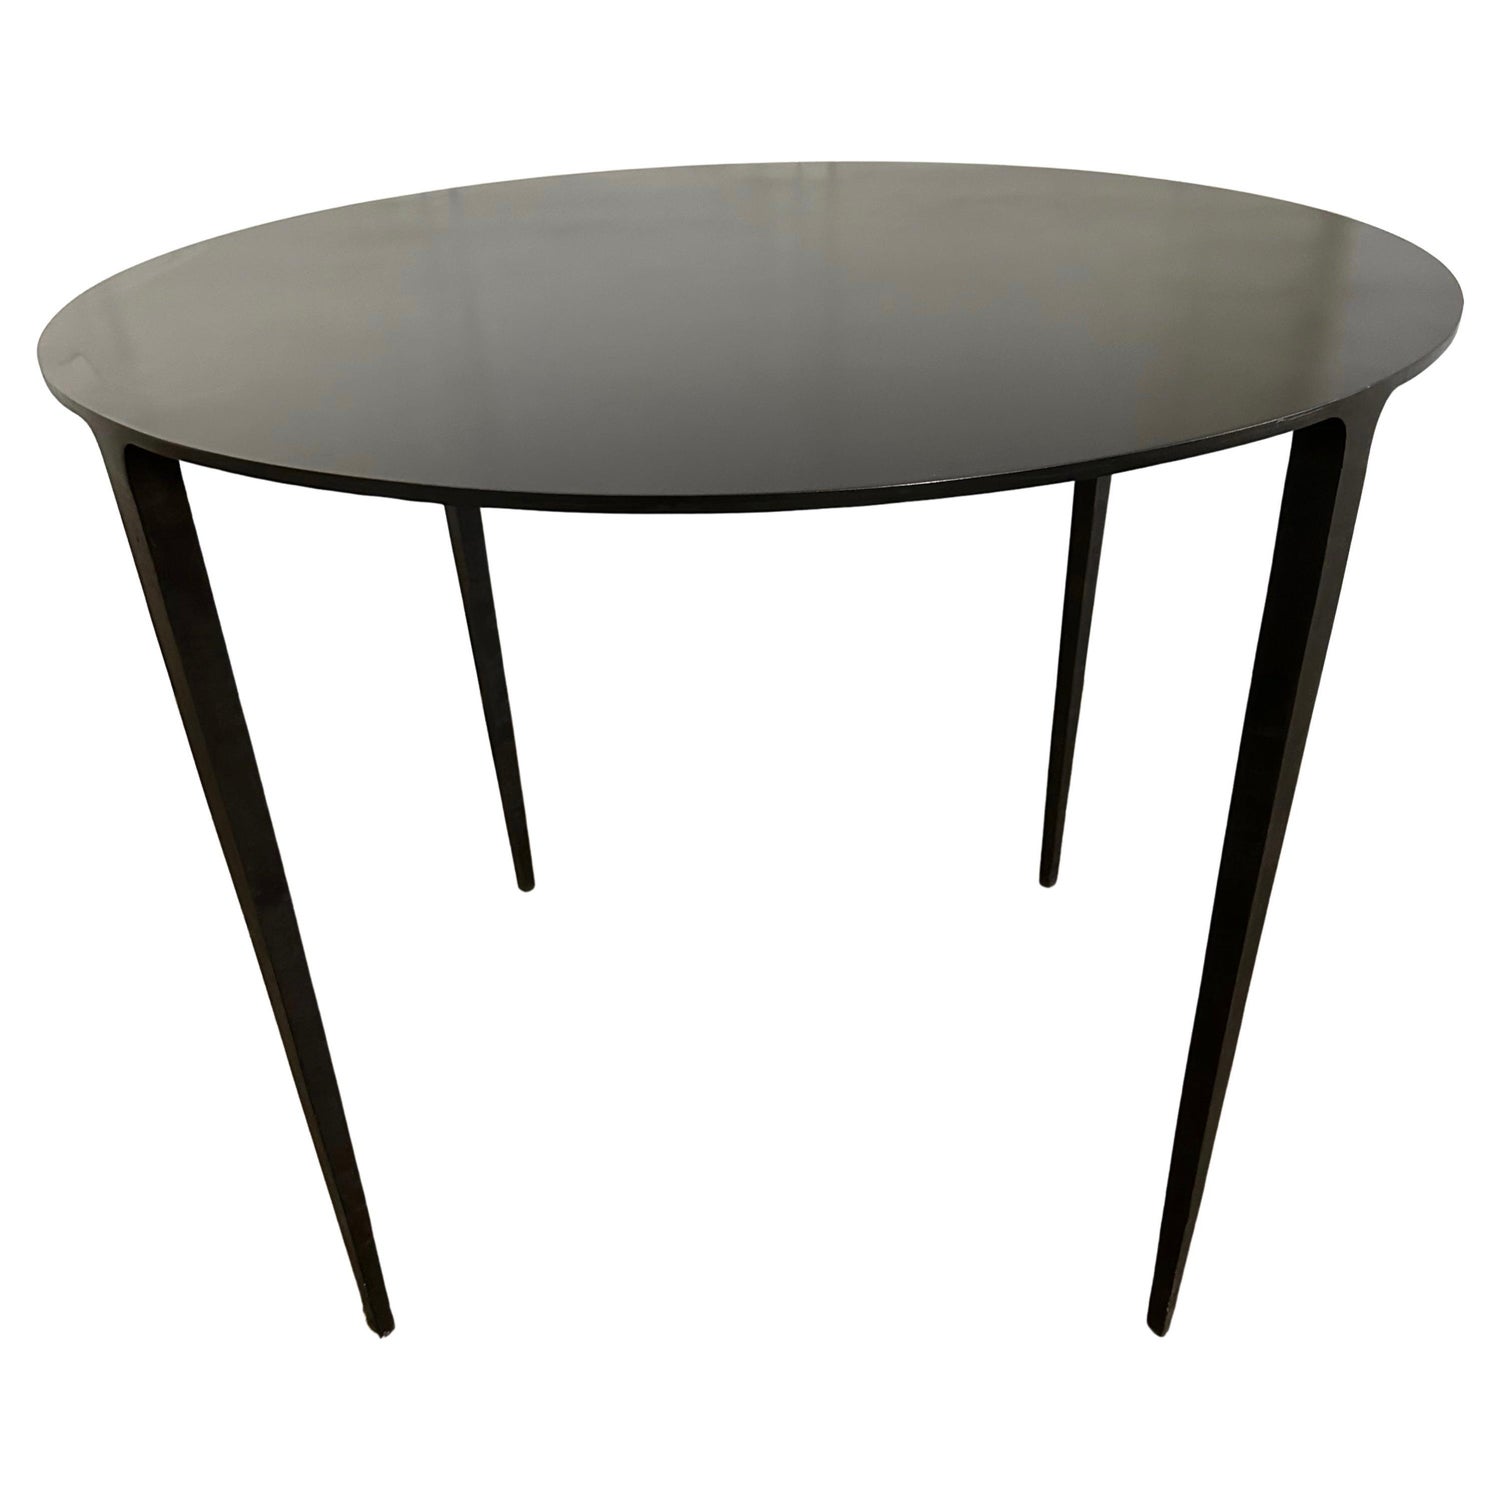 Round Glass-Top Center or Dining Table For Sale at 1stDibs